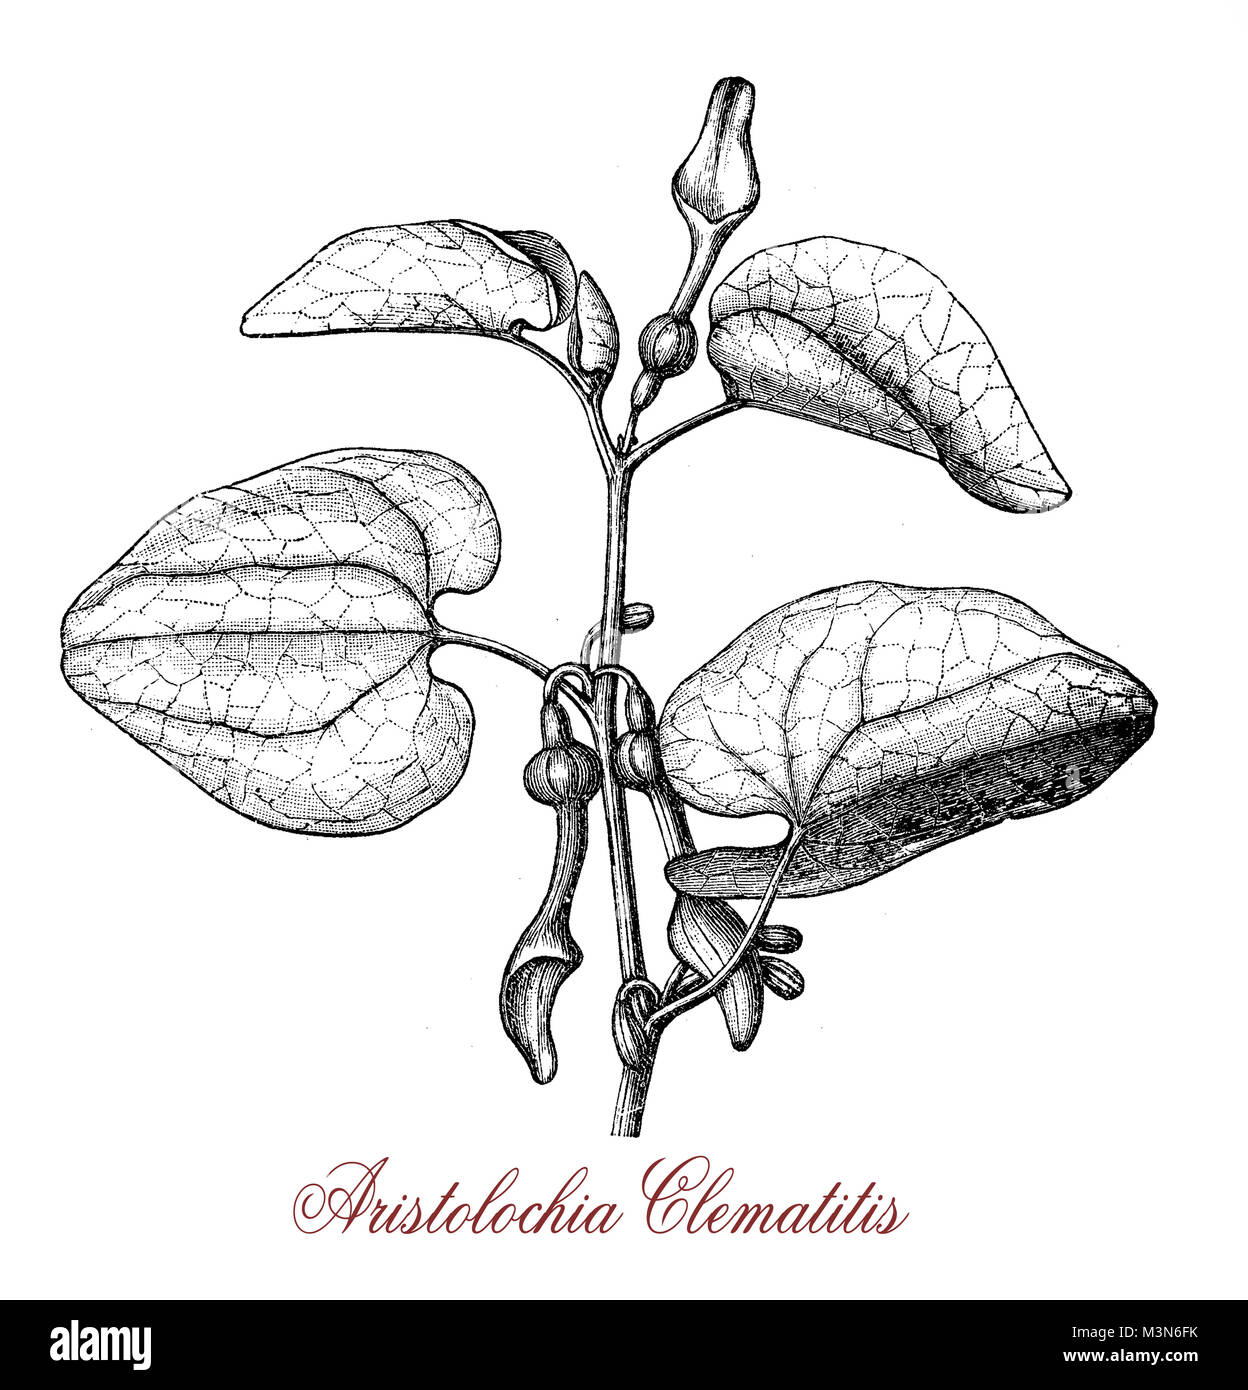 vintage engraving of aristolochia clematitis or European birthwort, twining plant with hear-shaped leaves and pale yellow tubular flowers, poisonous. Stock Photo